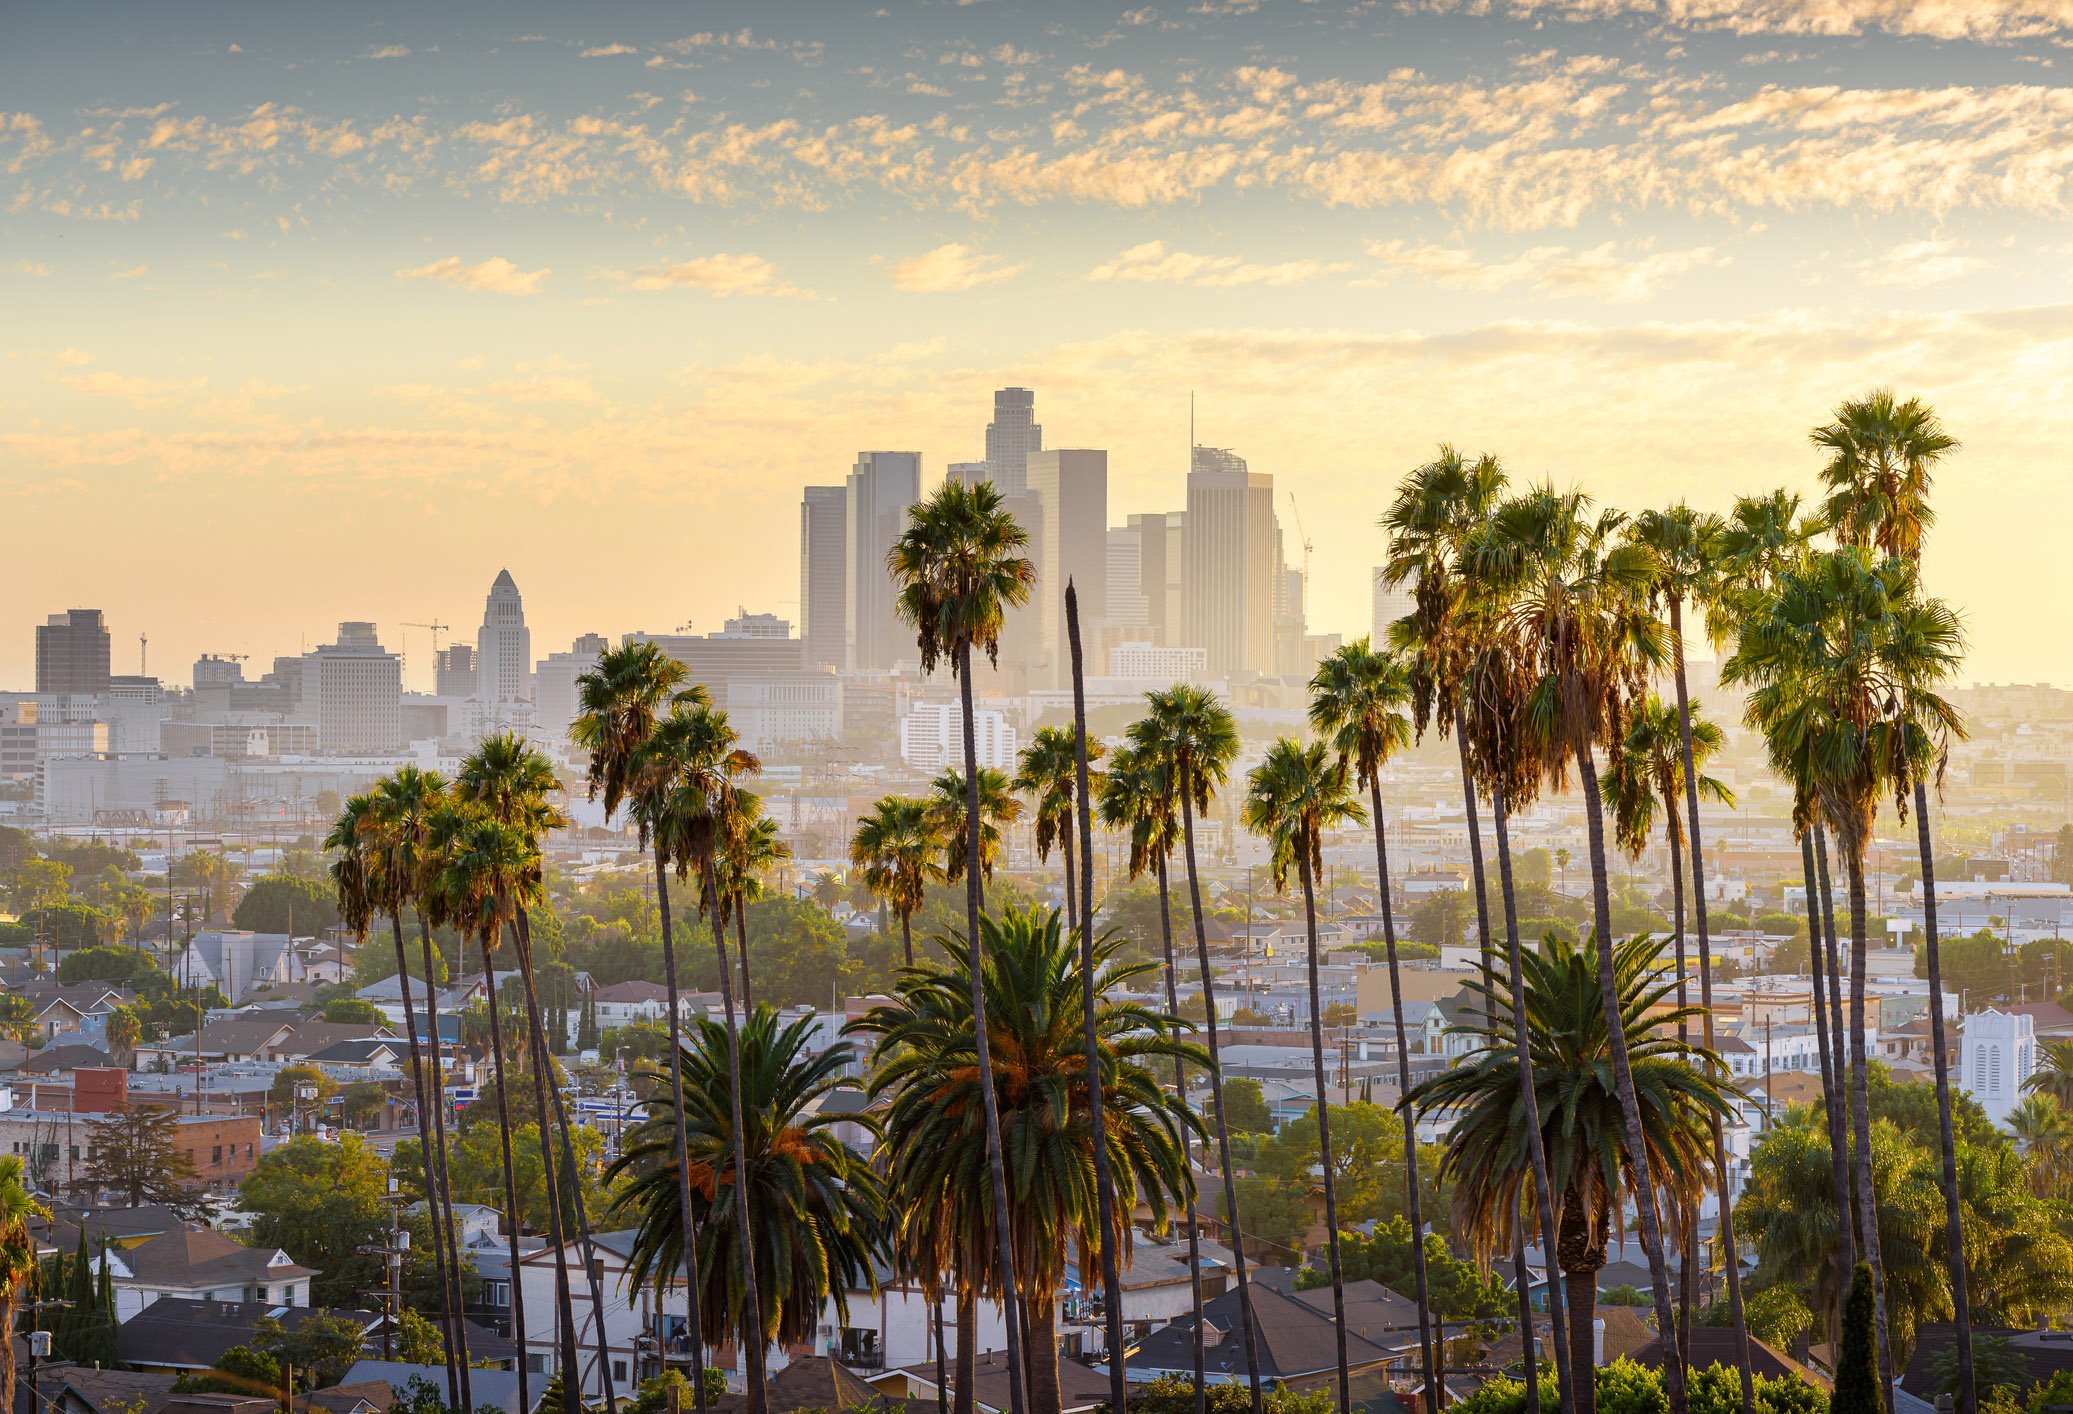 Los Angeles skyline with palm trees and houses in the foreground